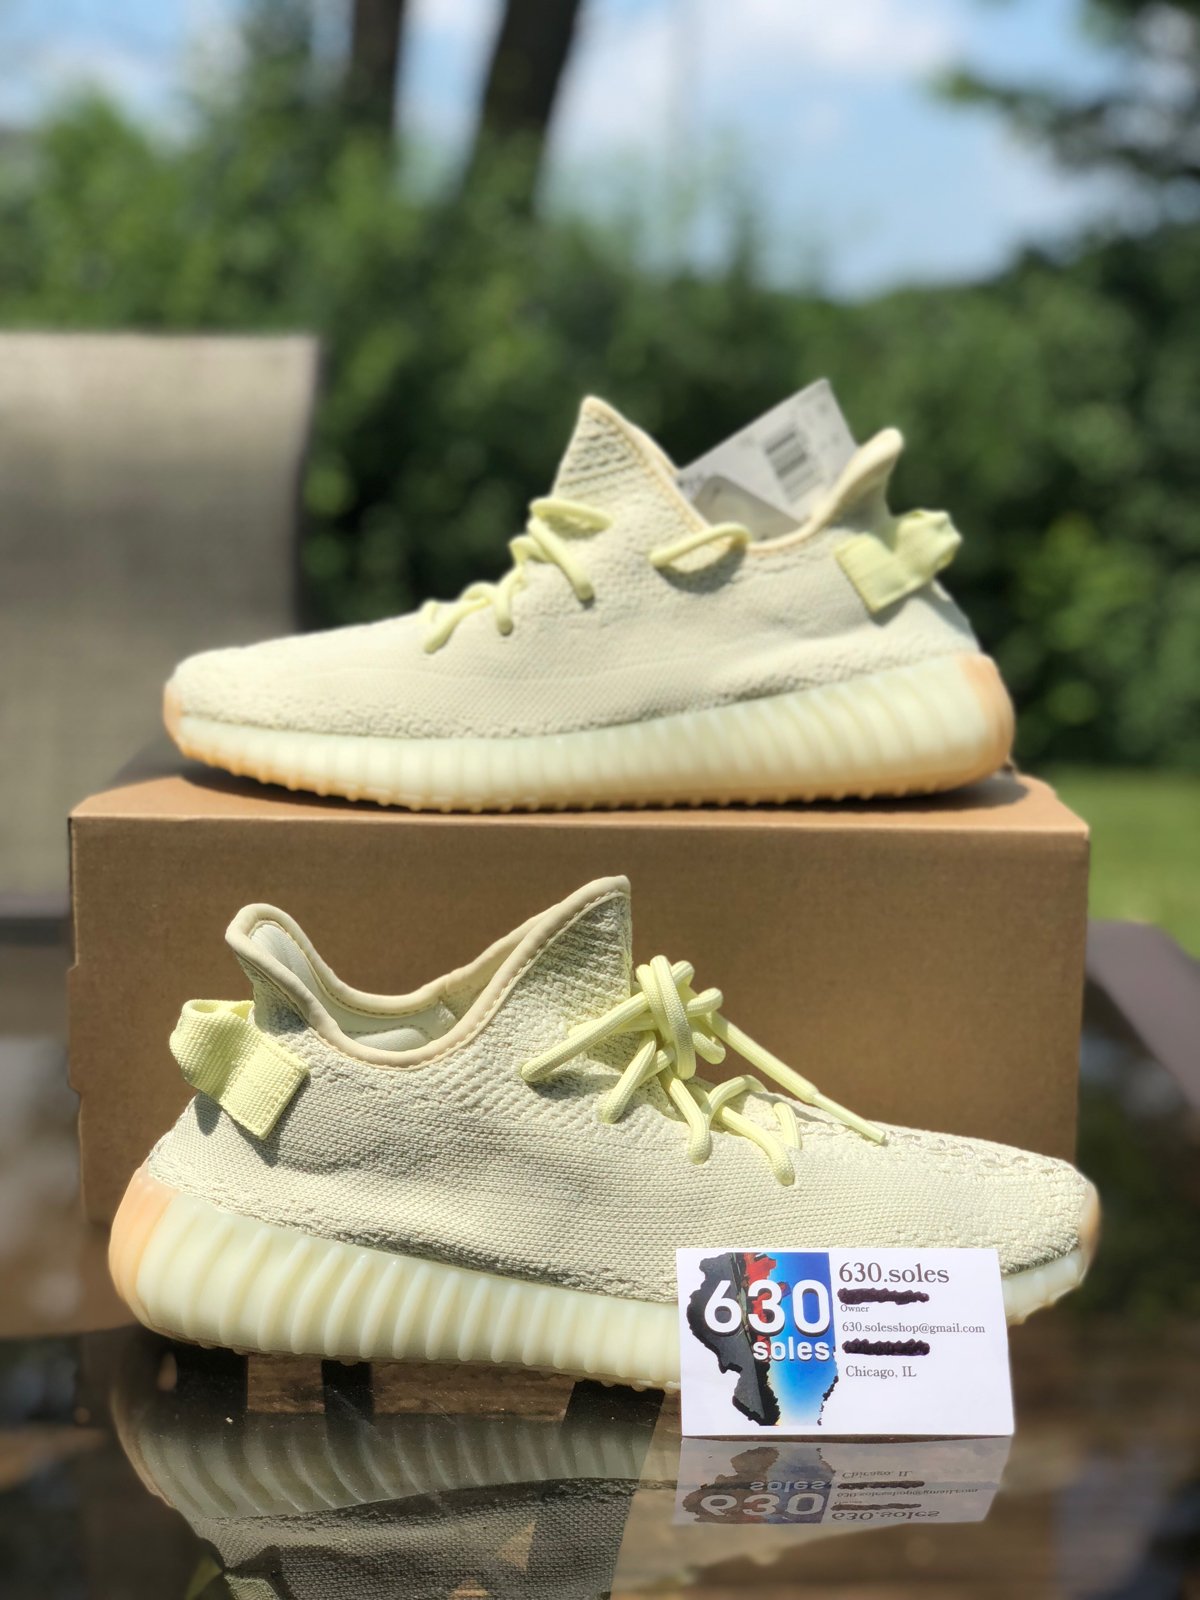 Adidas Yeezy 350 V2 Butter | 630.soles